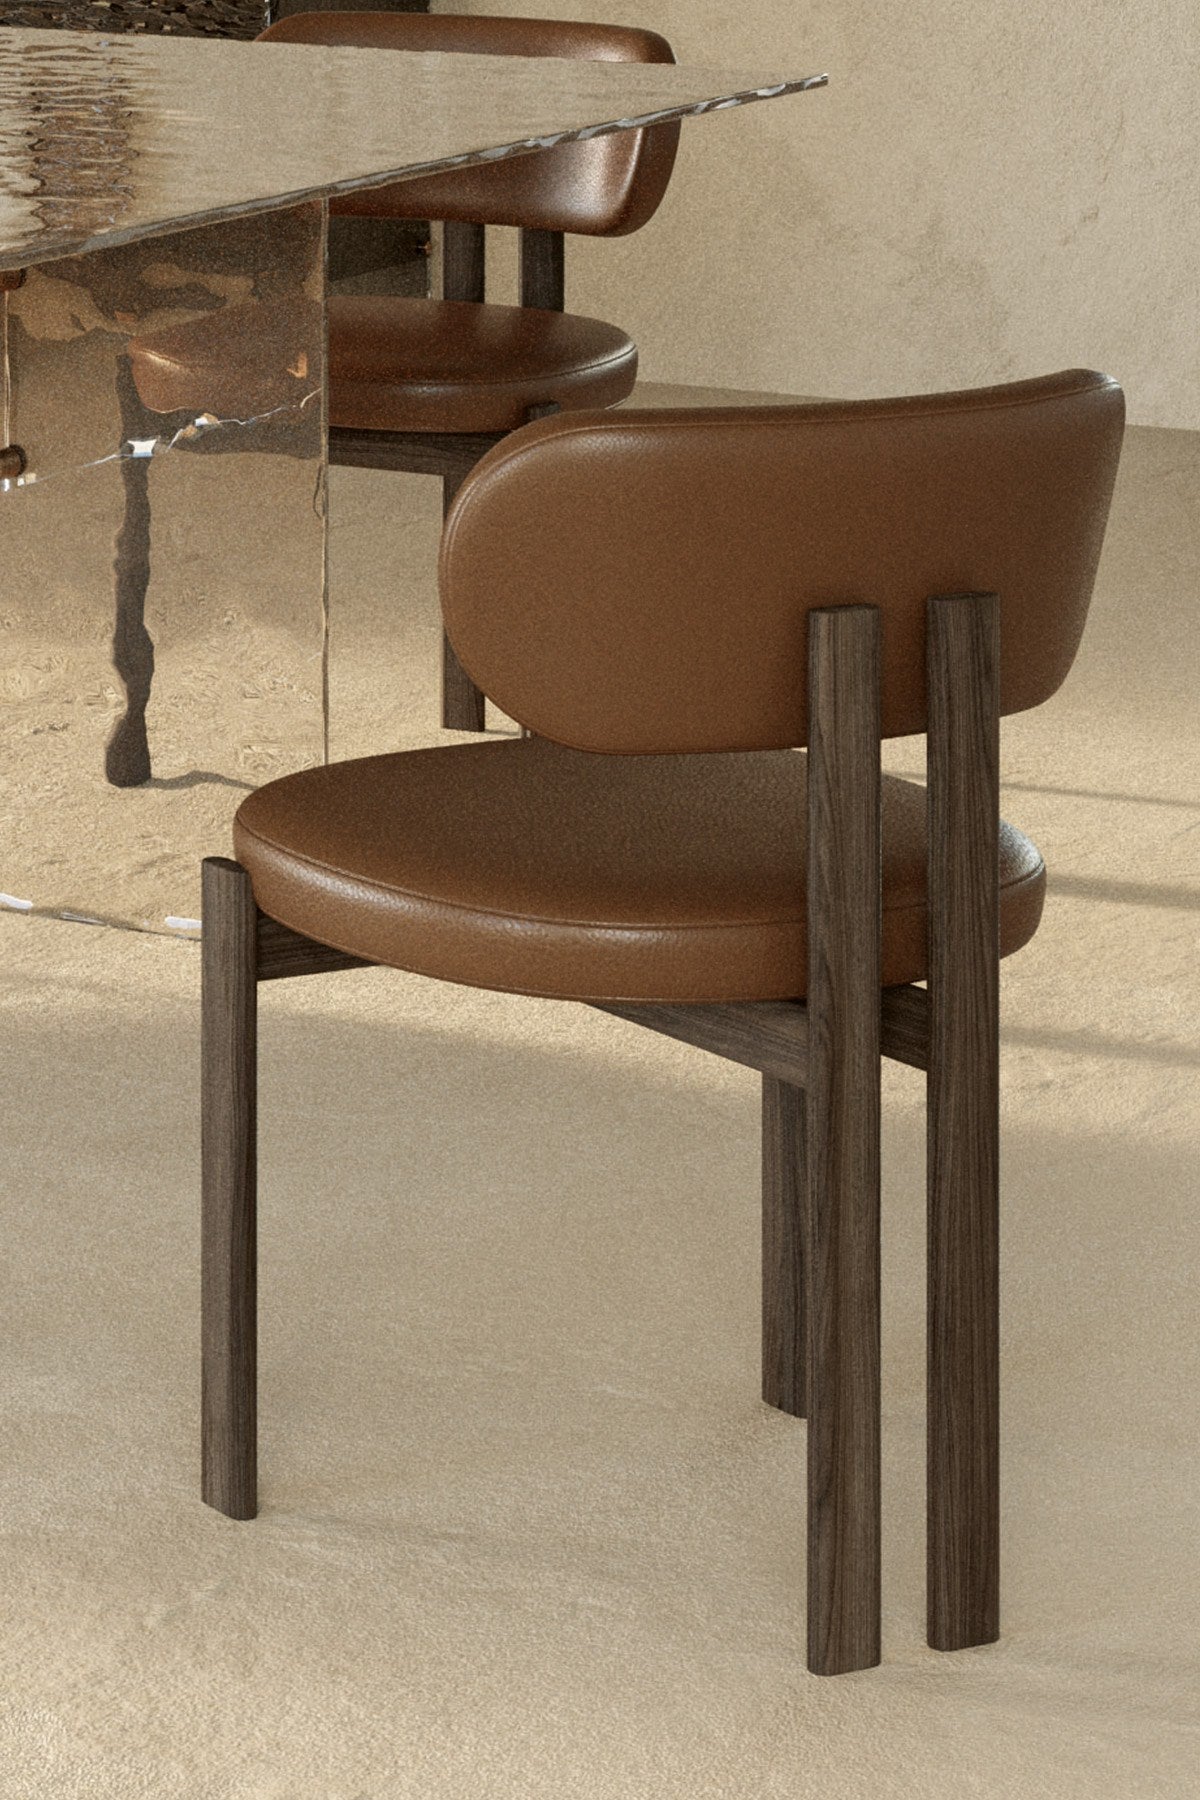 BAY WOOD I chair by NATUREDESIGN